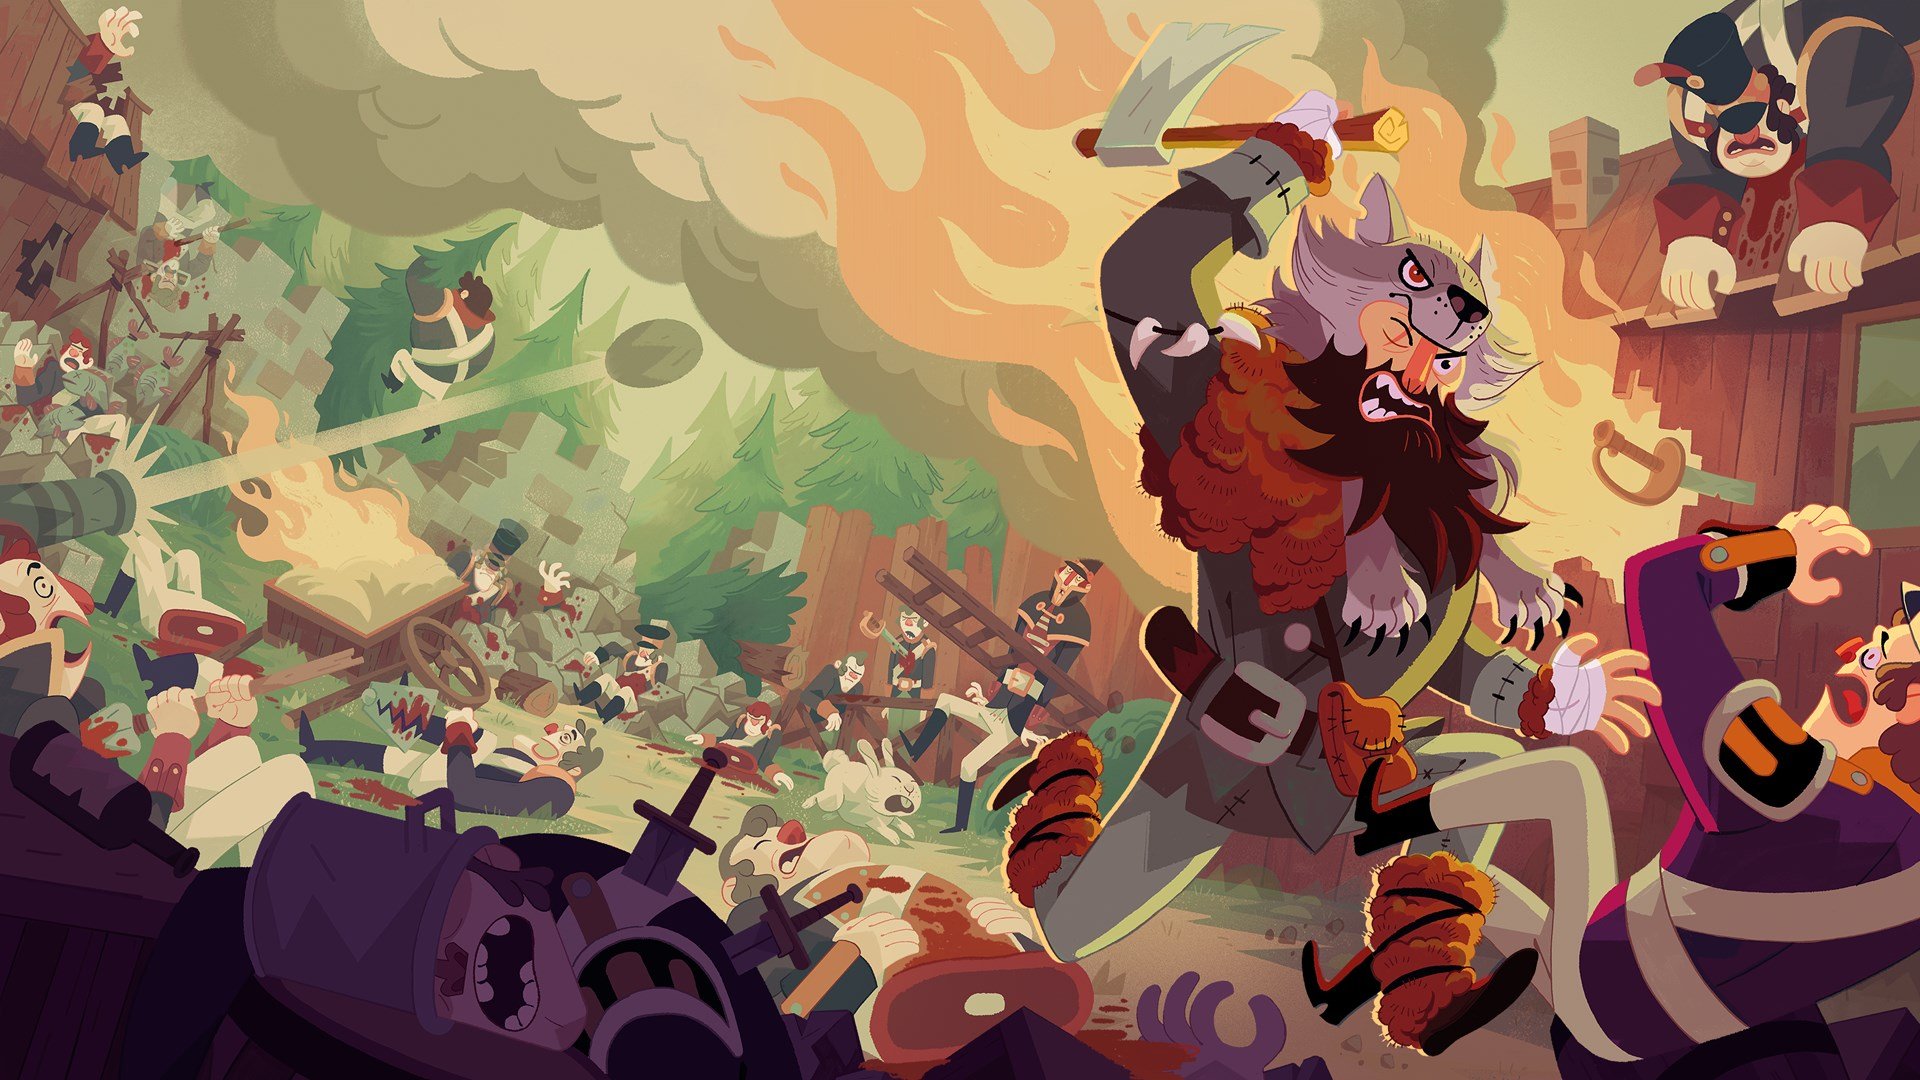 Bloodroots cover image